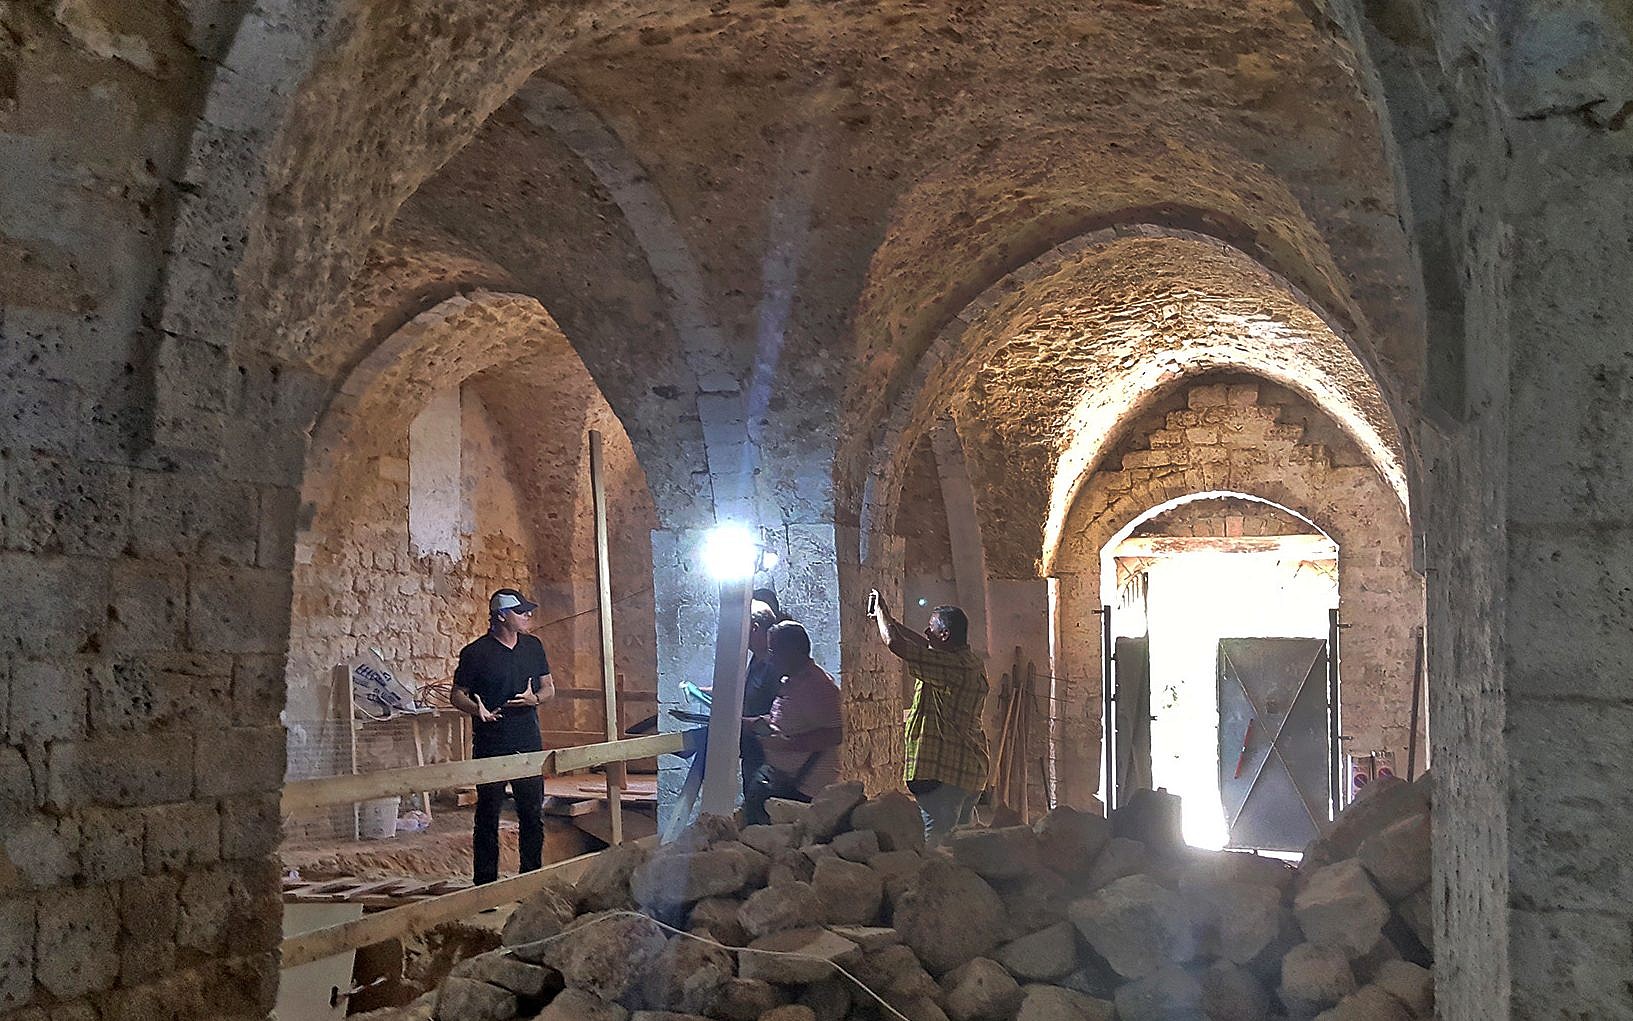 ottoman era soap factory unearthed